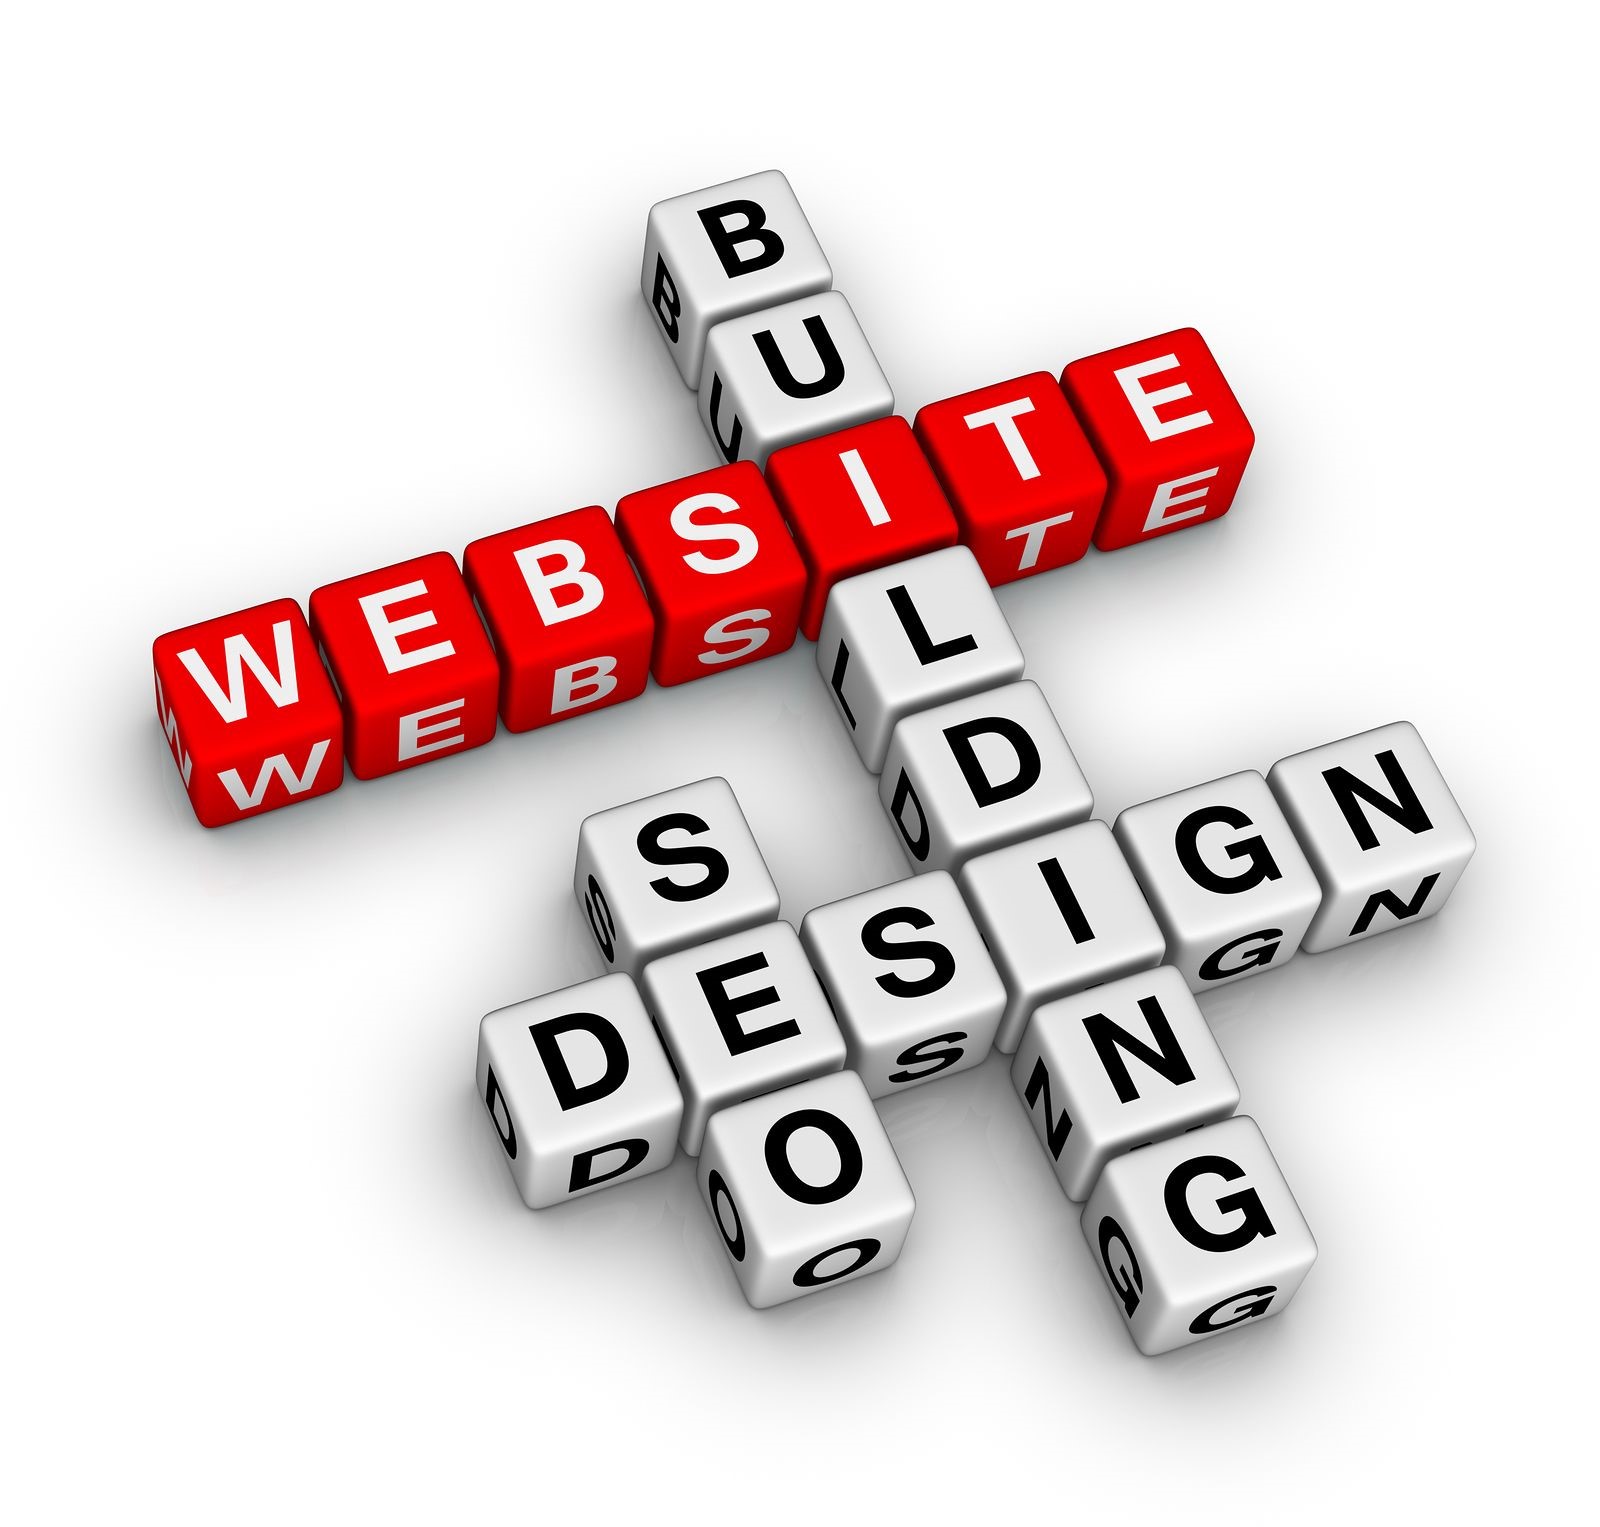 Website Design Elements that Every Business Needs to Be Conscious Of